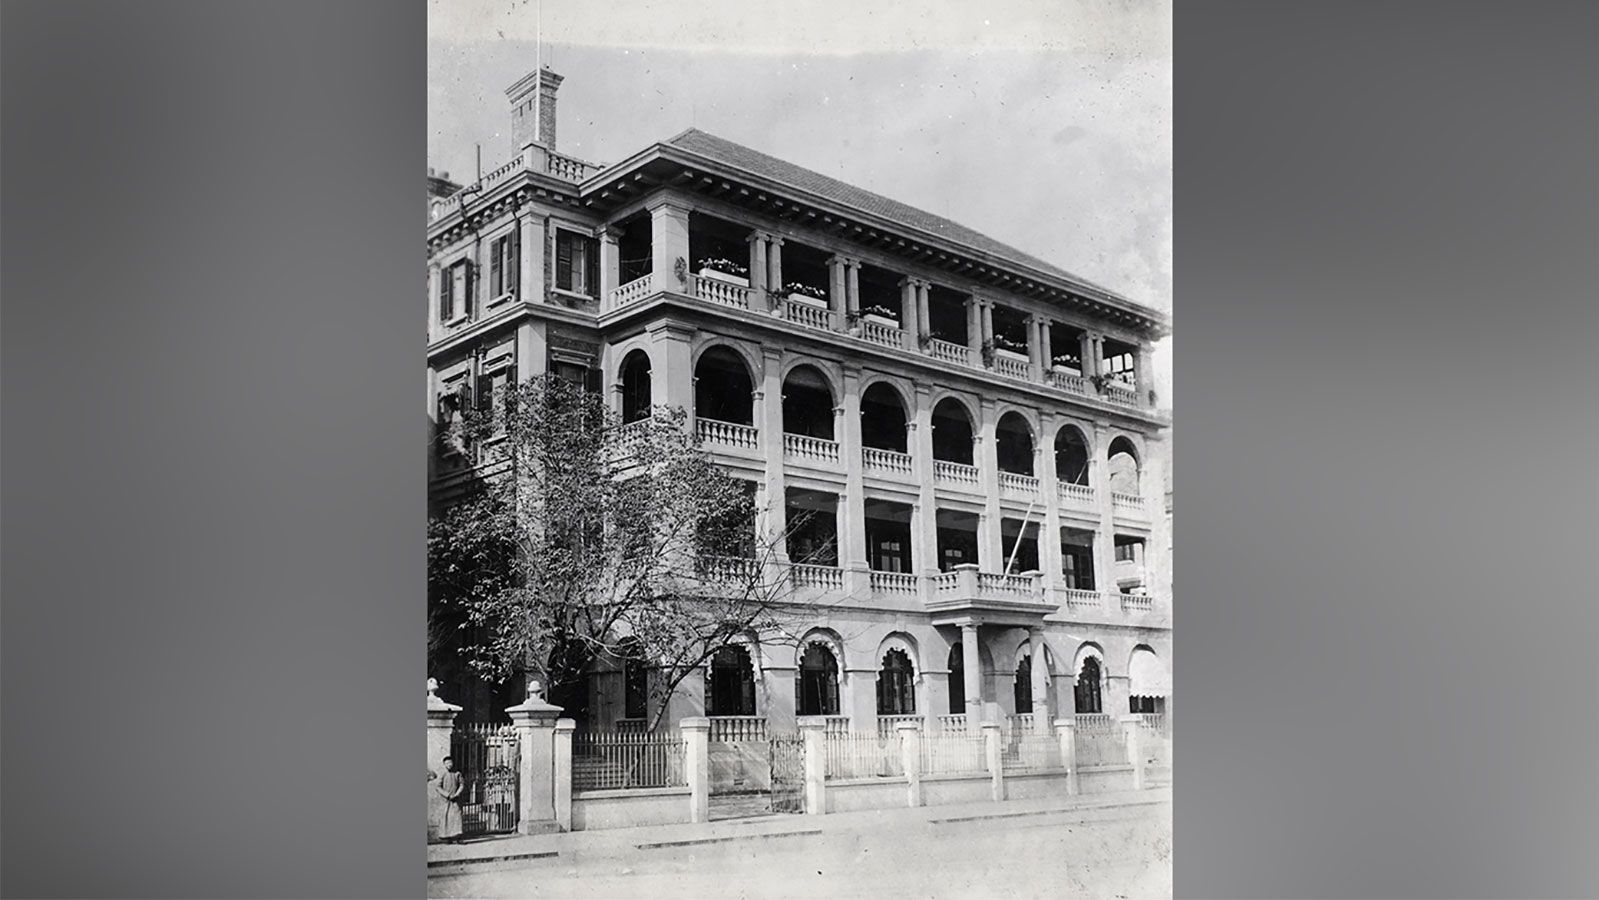 Holt House was the office for Butterfield & Swire, one of the biggest and best-known British "hongs" or trading houses in China.